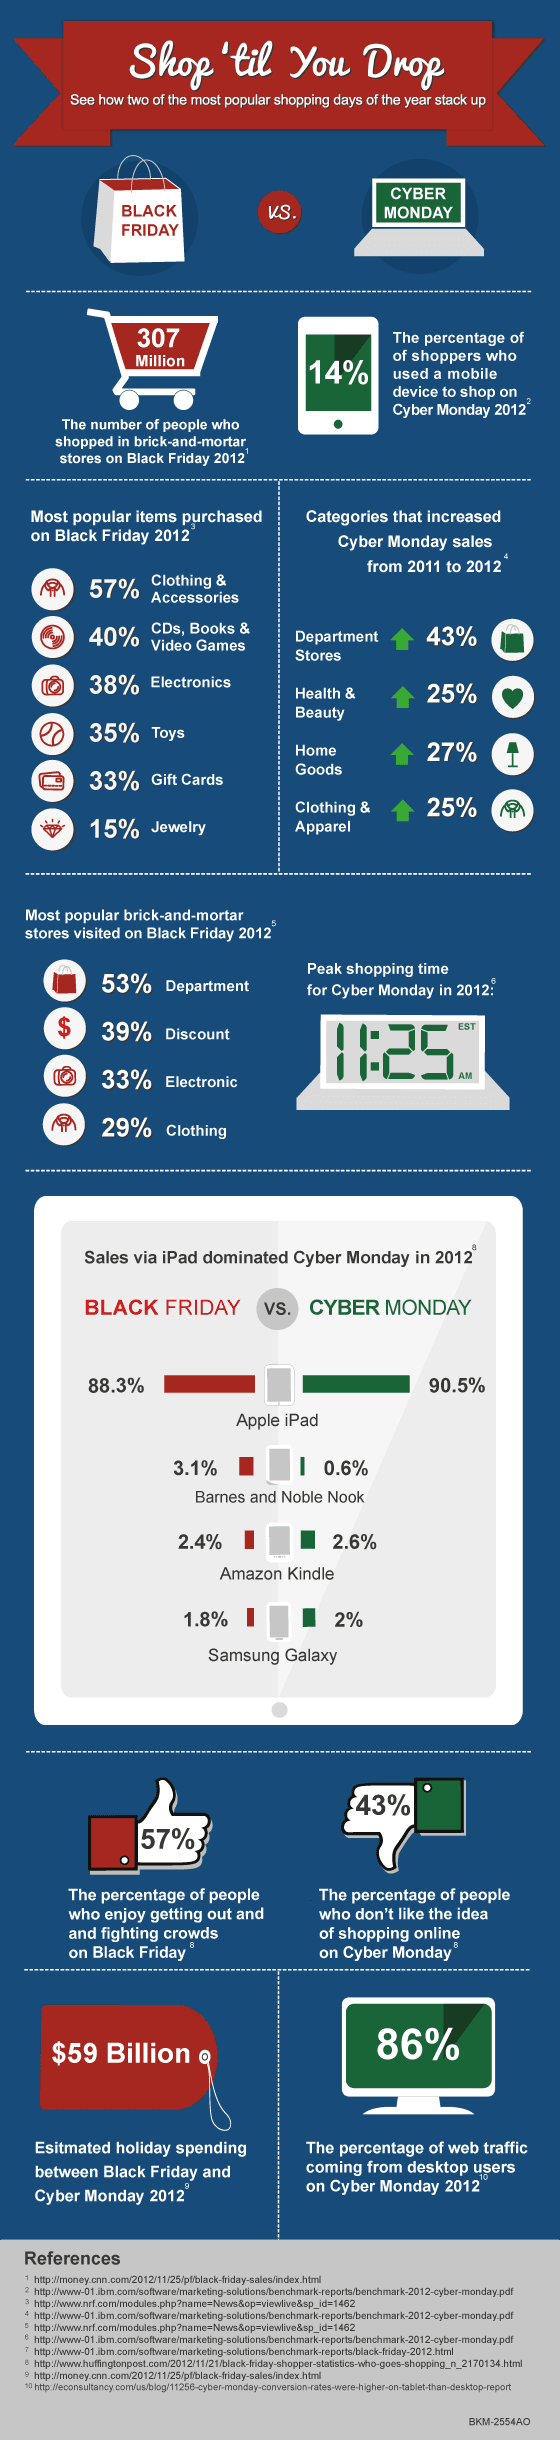 Black Friday and Cyber Monday Battle It Out for Consumer Dollars [Infographic]